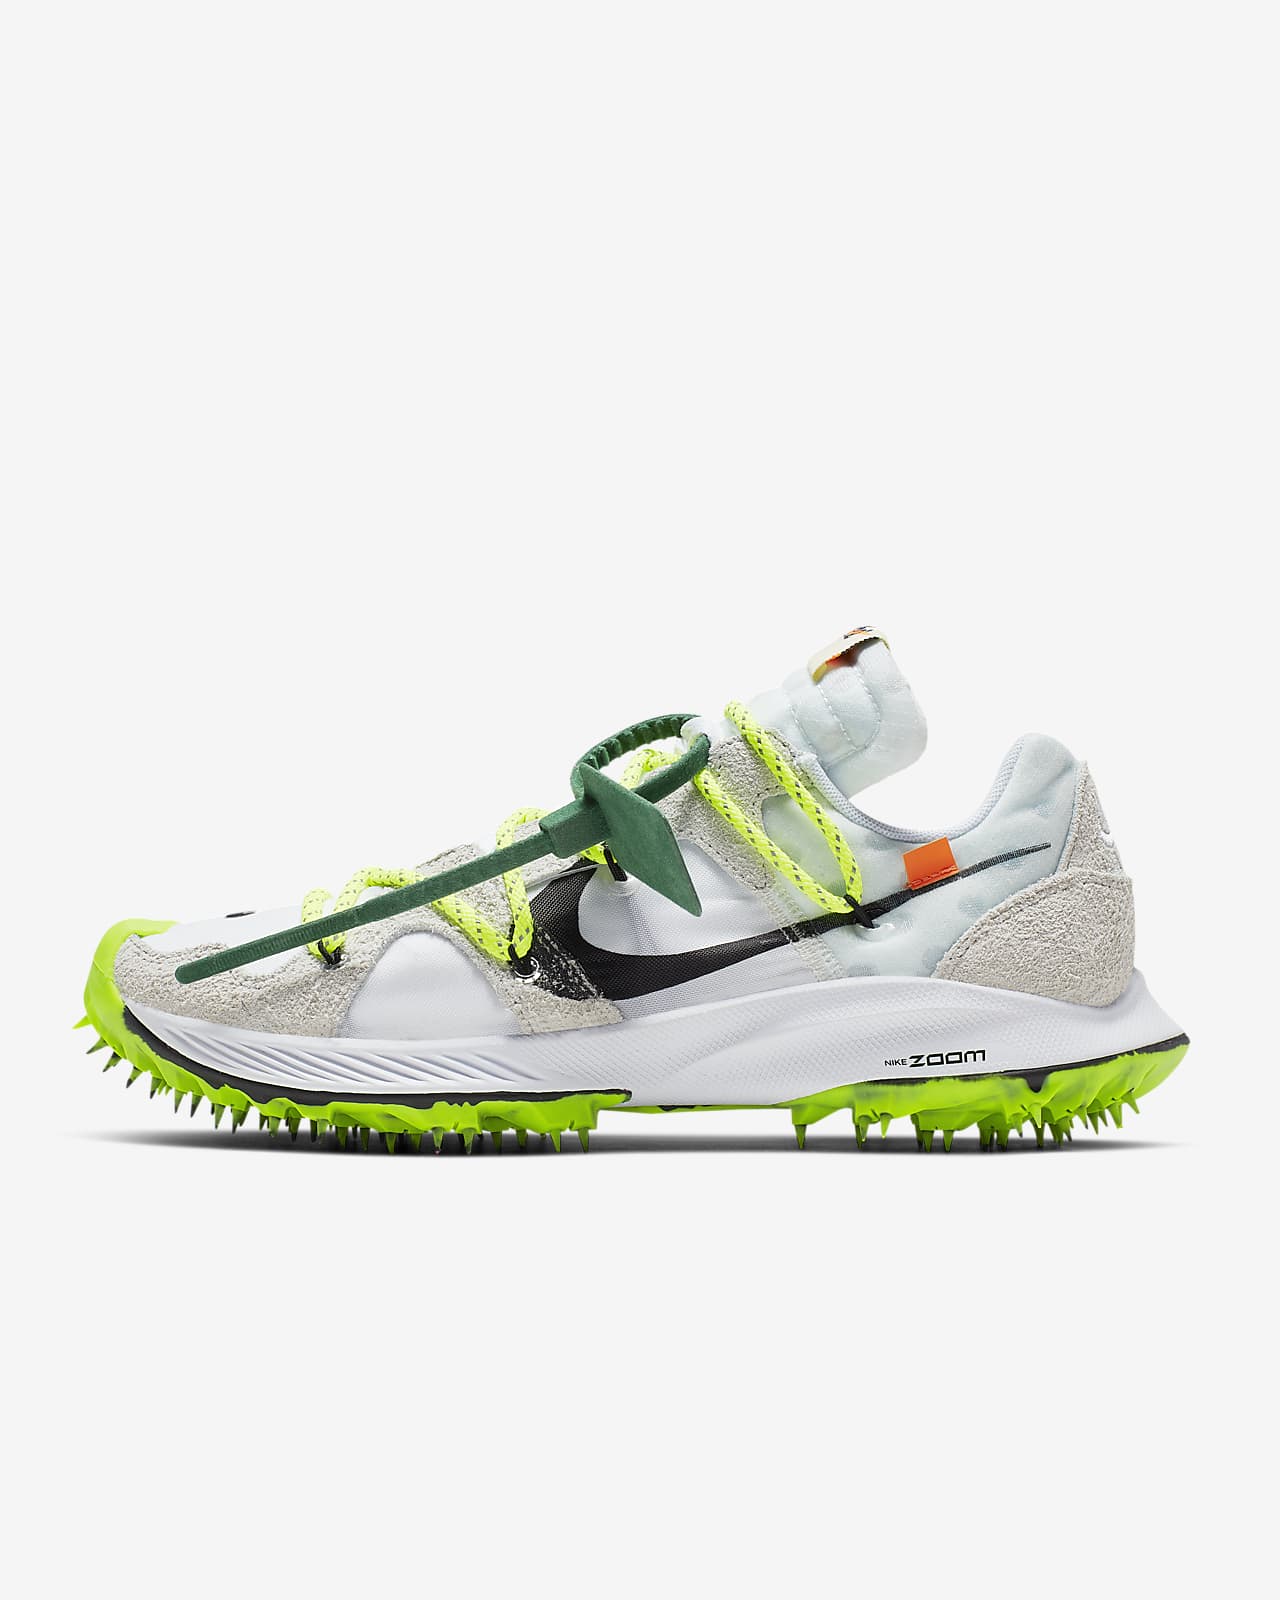 nike off white womens shoes